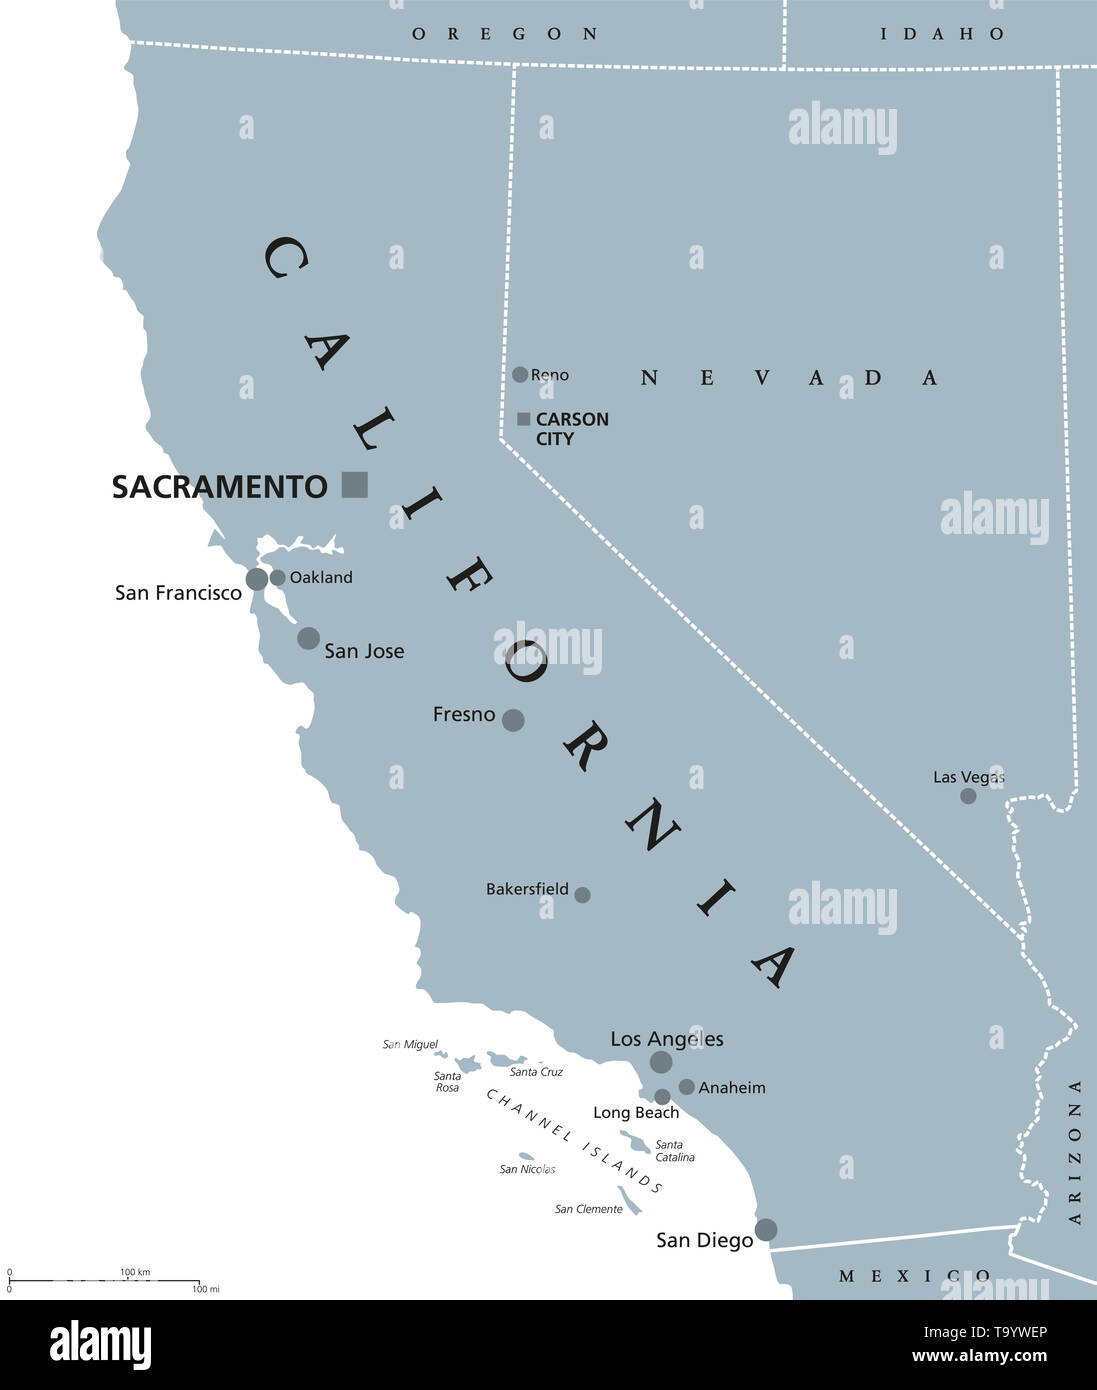 California political map with capital Sacramento, the largest cities and borders. State in the Pacific Region of the United States. The Golden State. Stock Photo